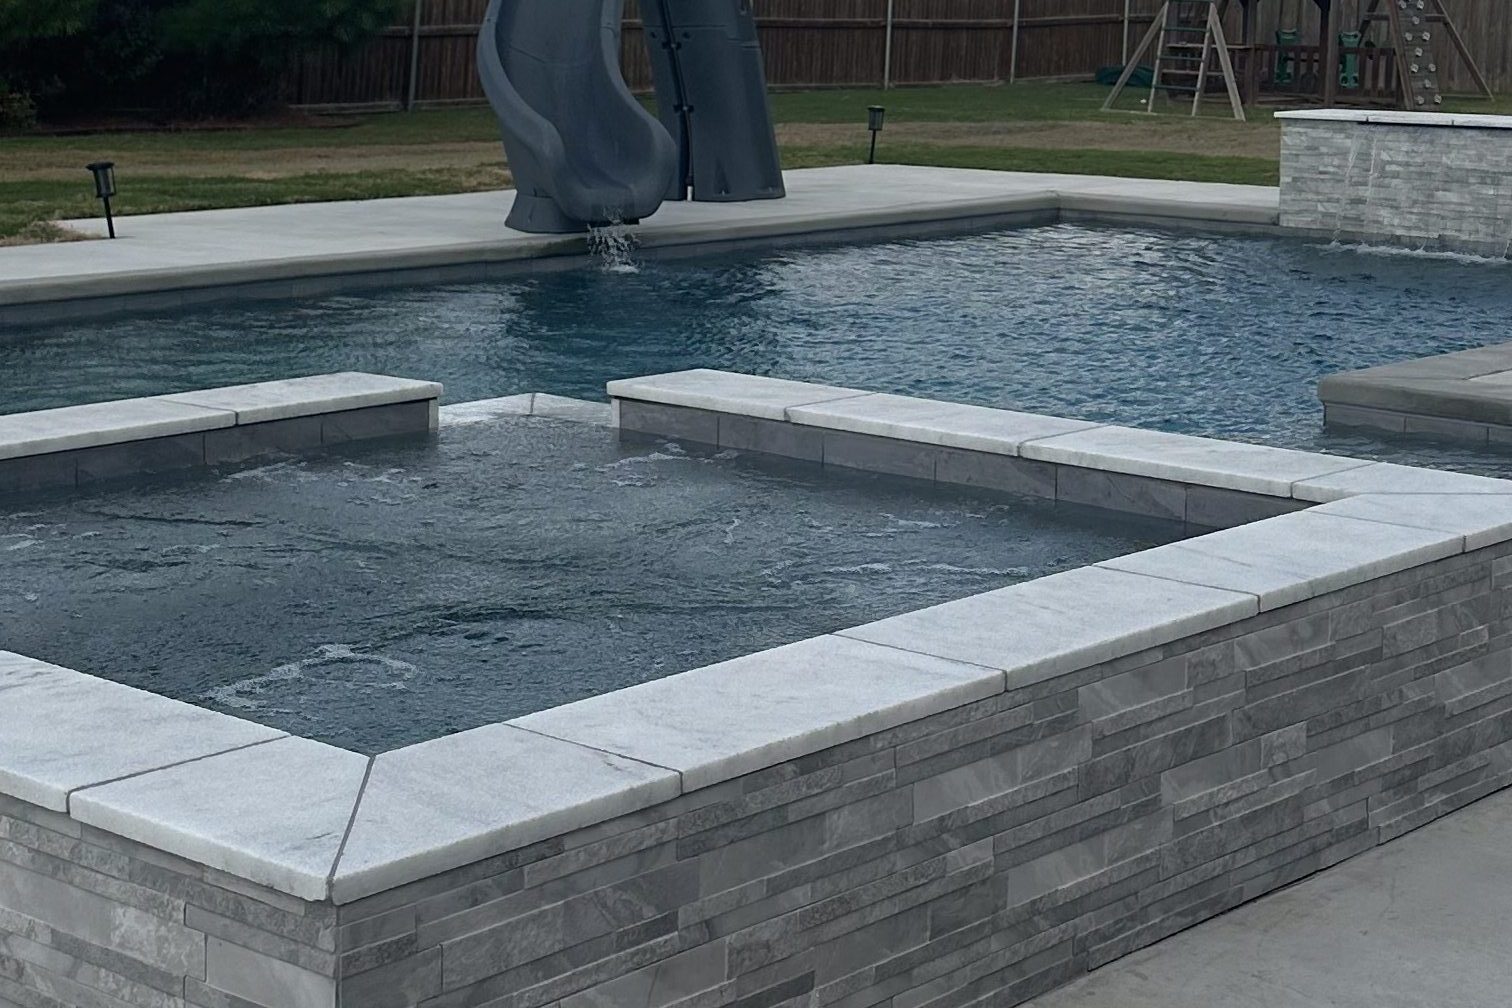 Pool finished after News 4's story ran. Image courtesy KFOR